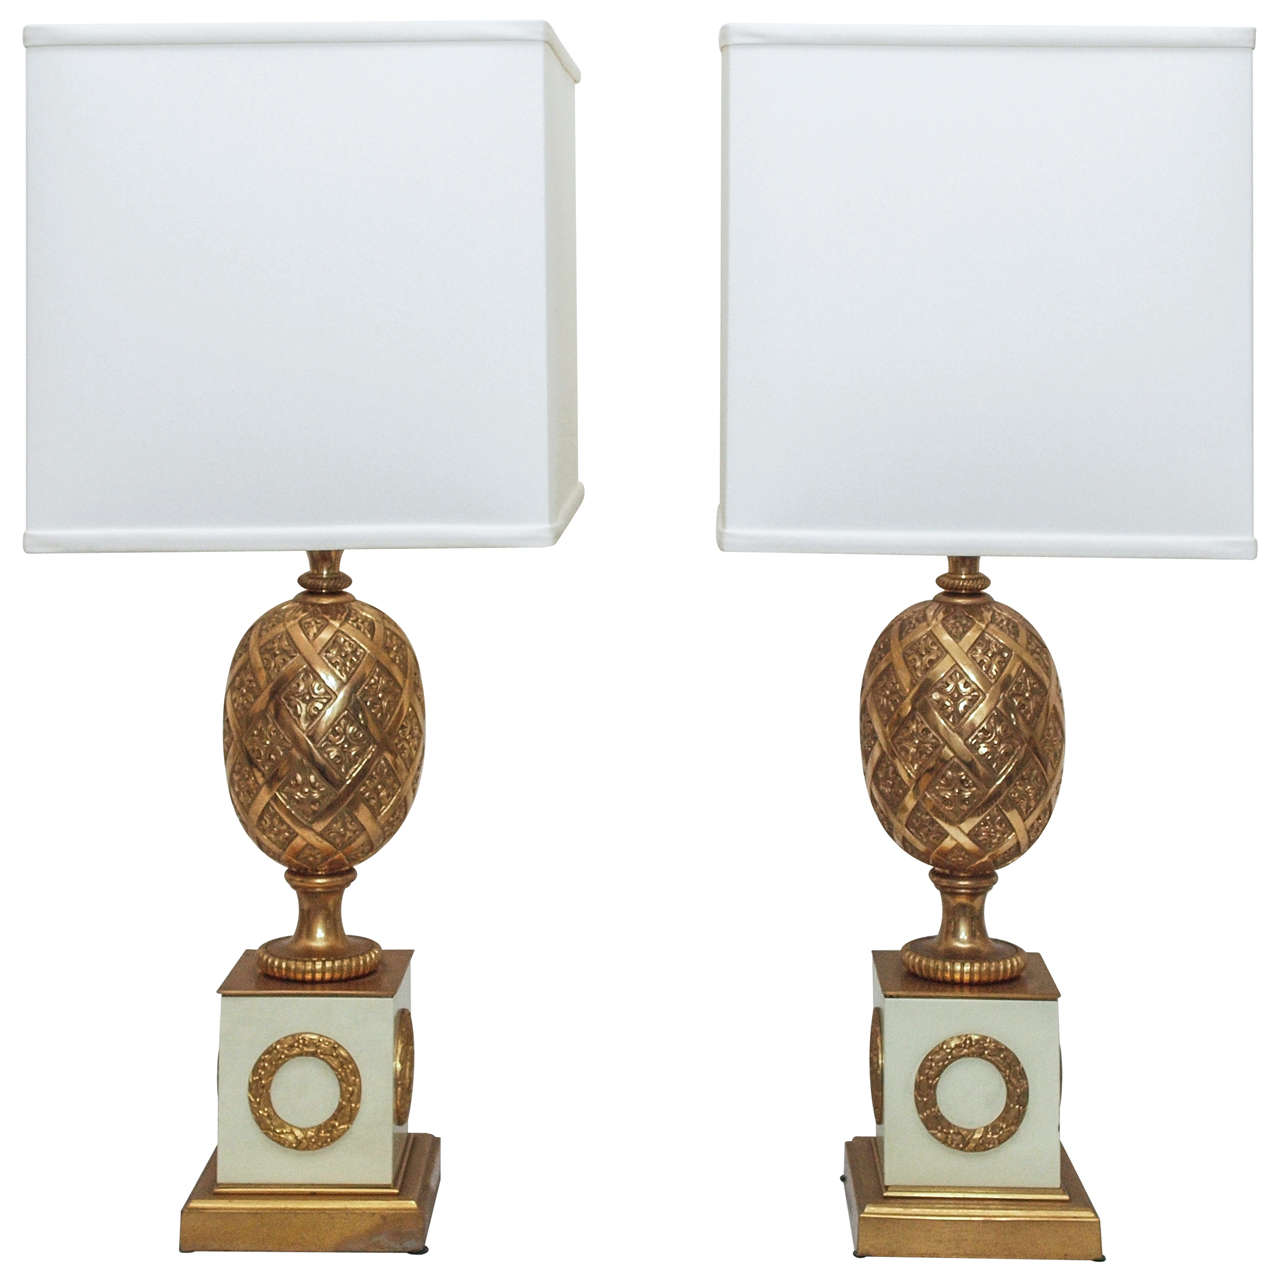 SATURDAY SALE Pair Neo-Classical Gilt Bronze Table Lamps